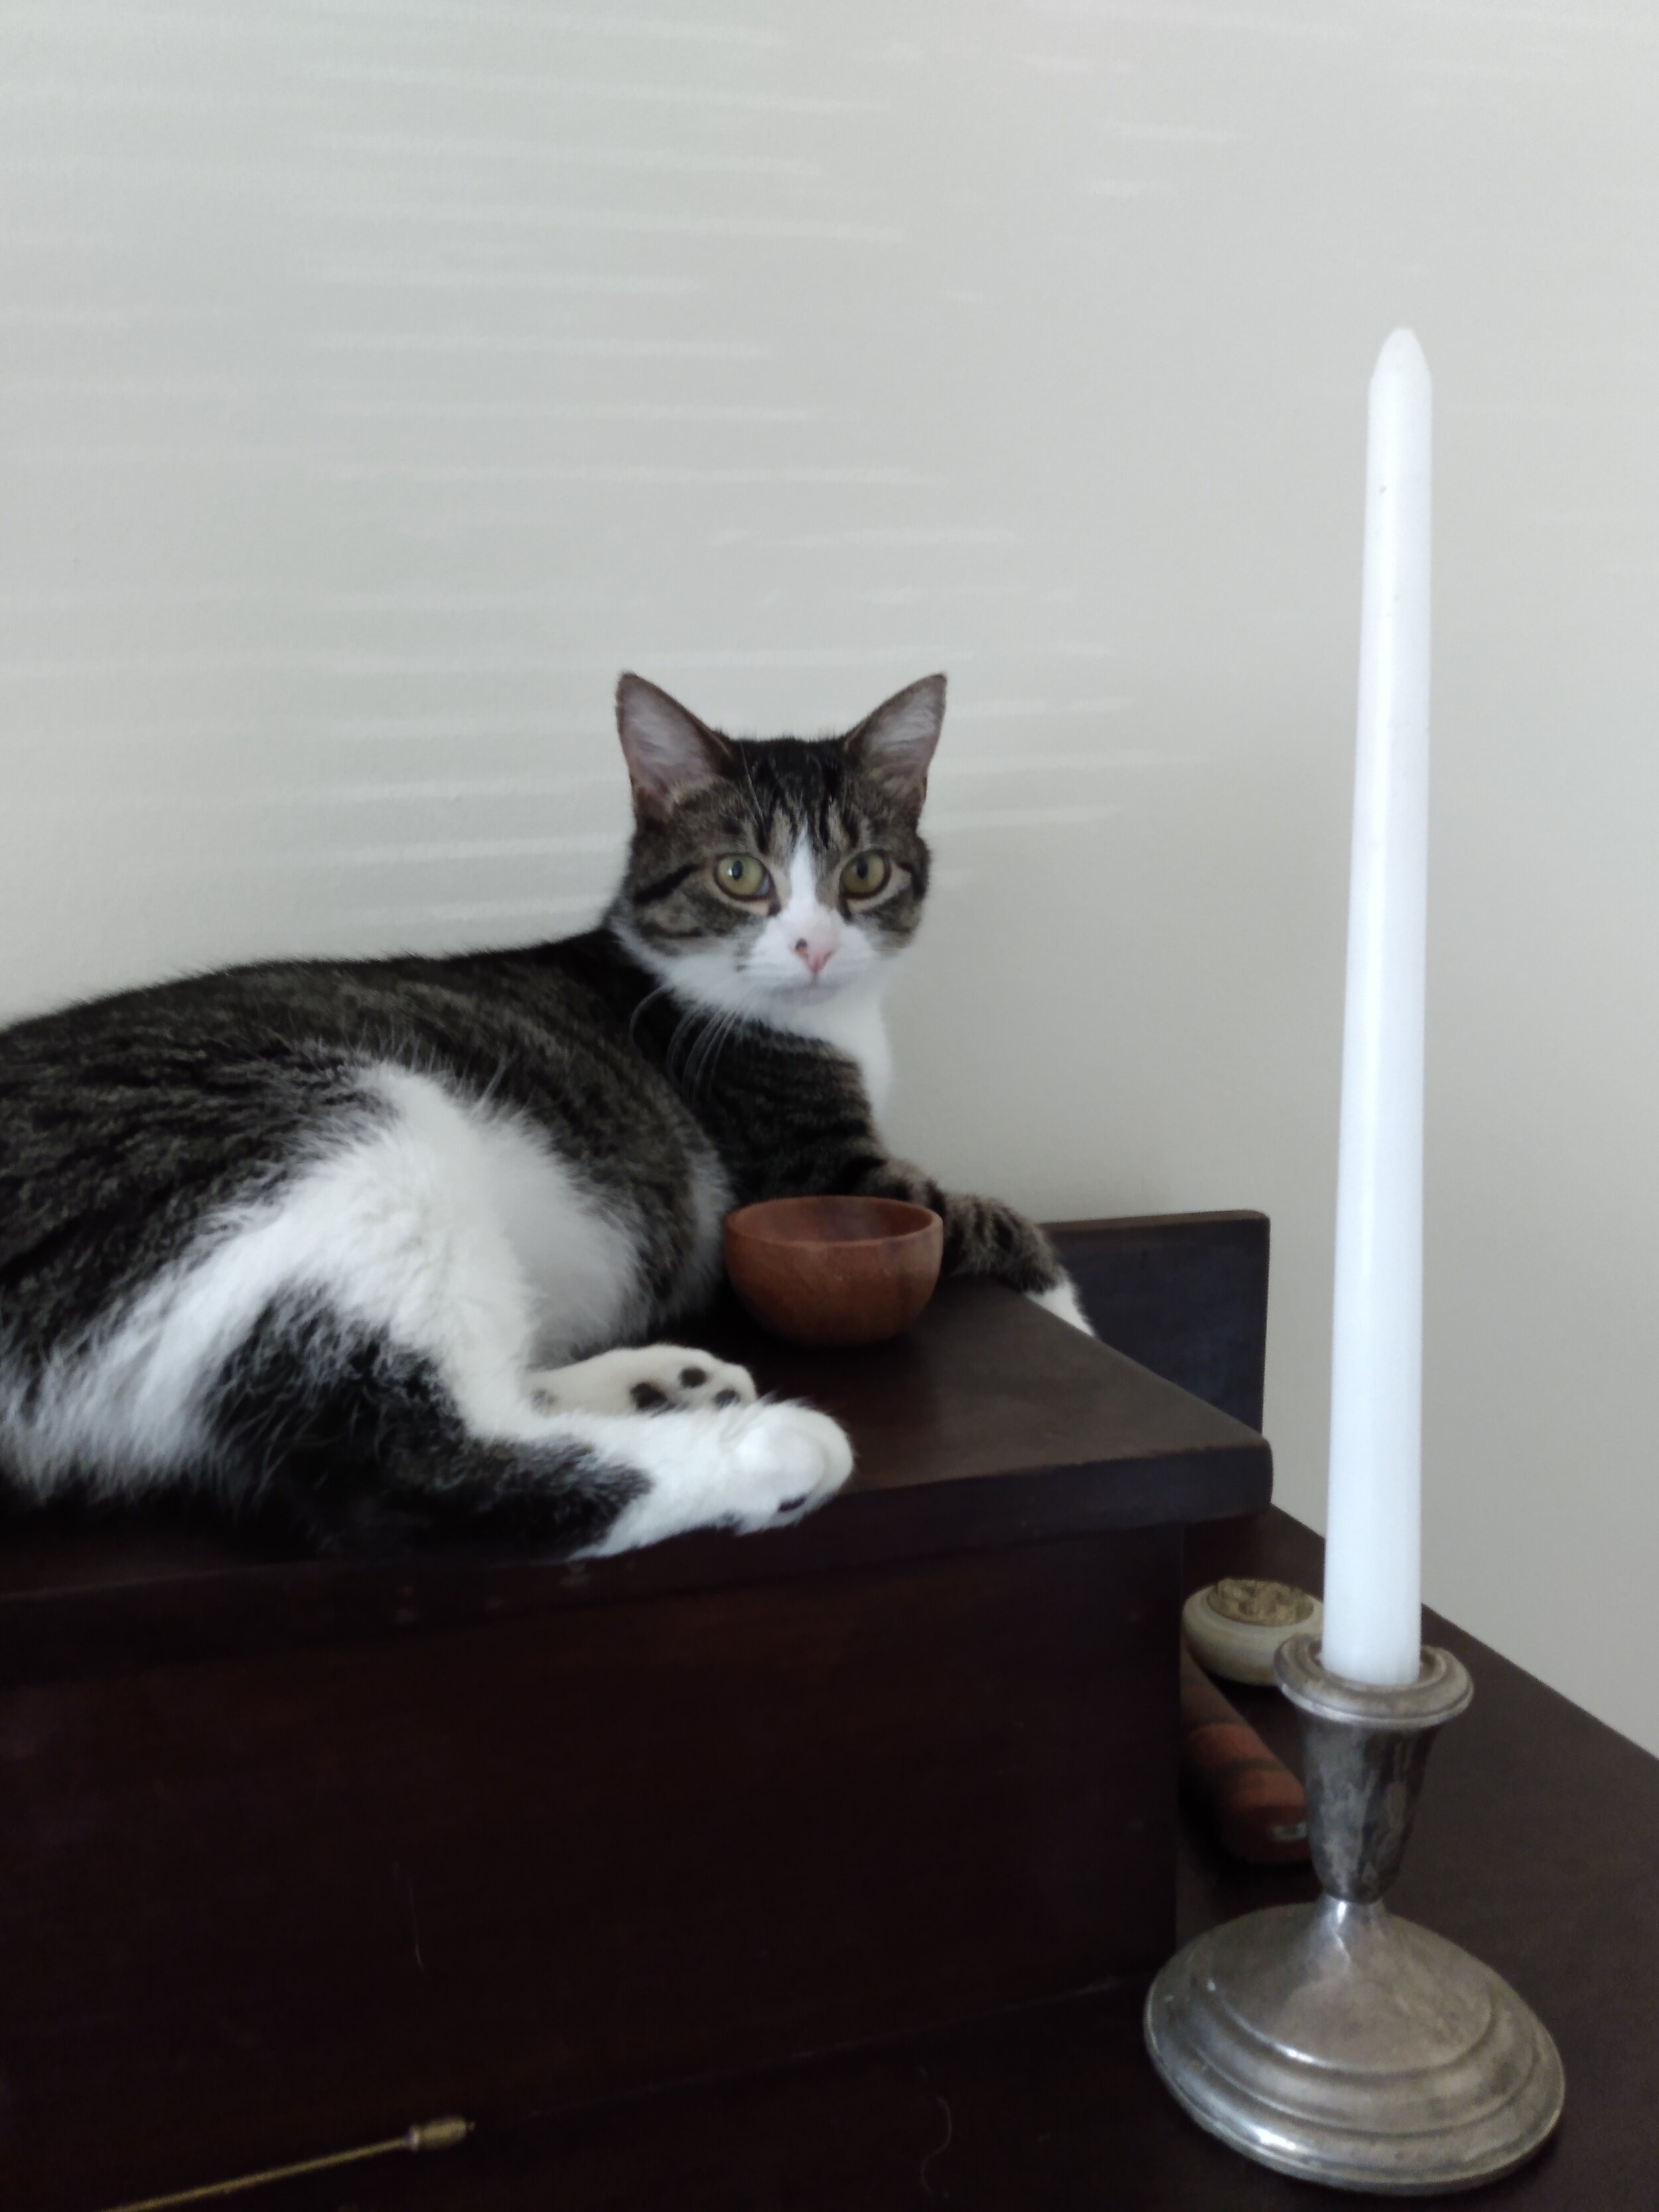 My cat, Pixie, is drawn to my altar and candles! Photo by author